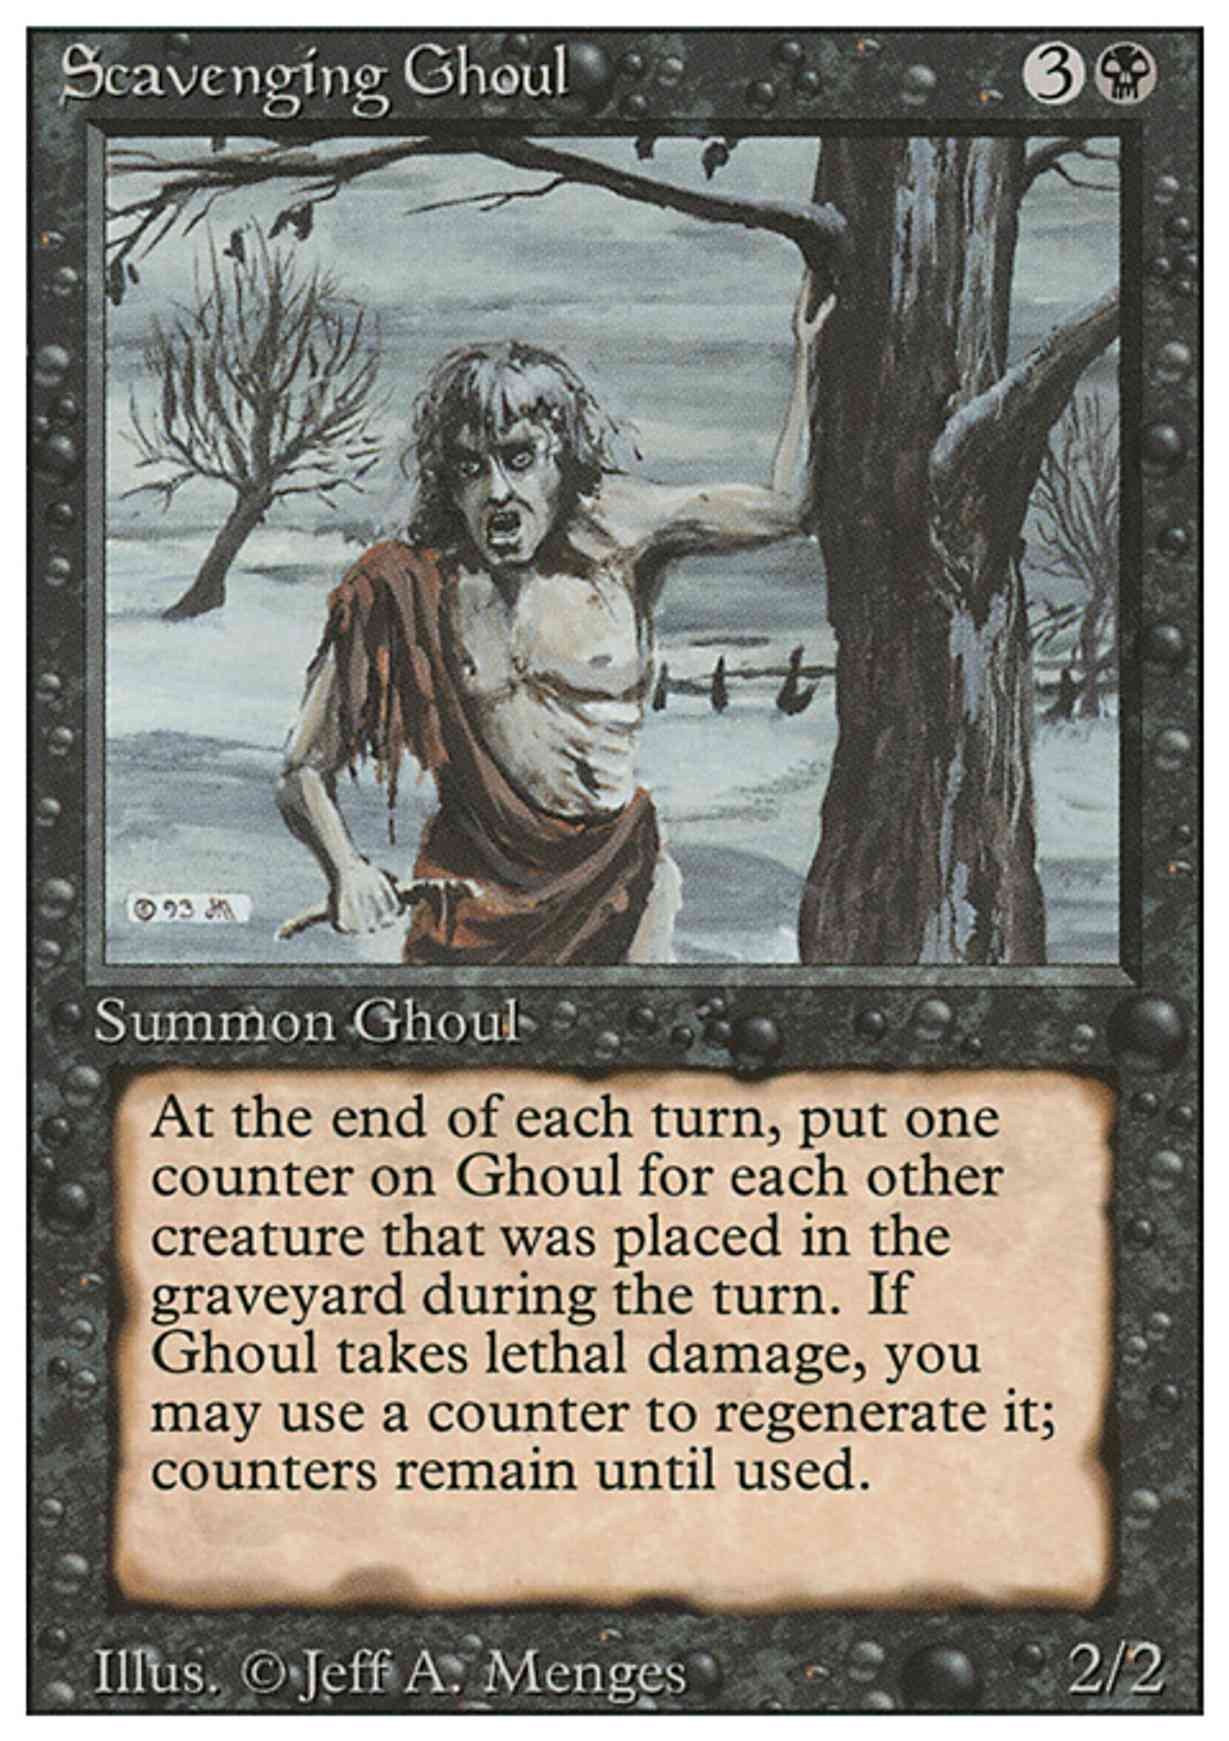 Scavenging Ghoul magic card front